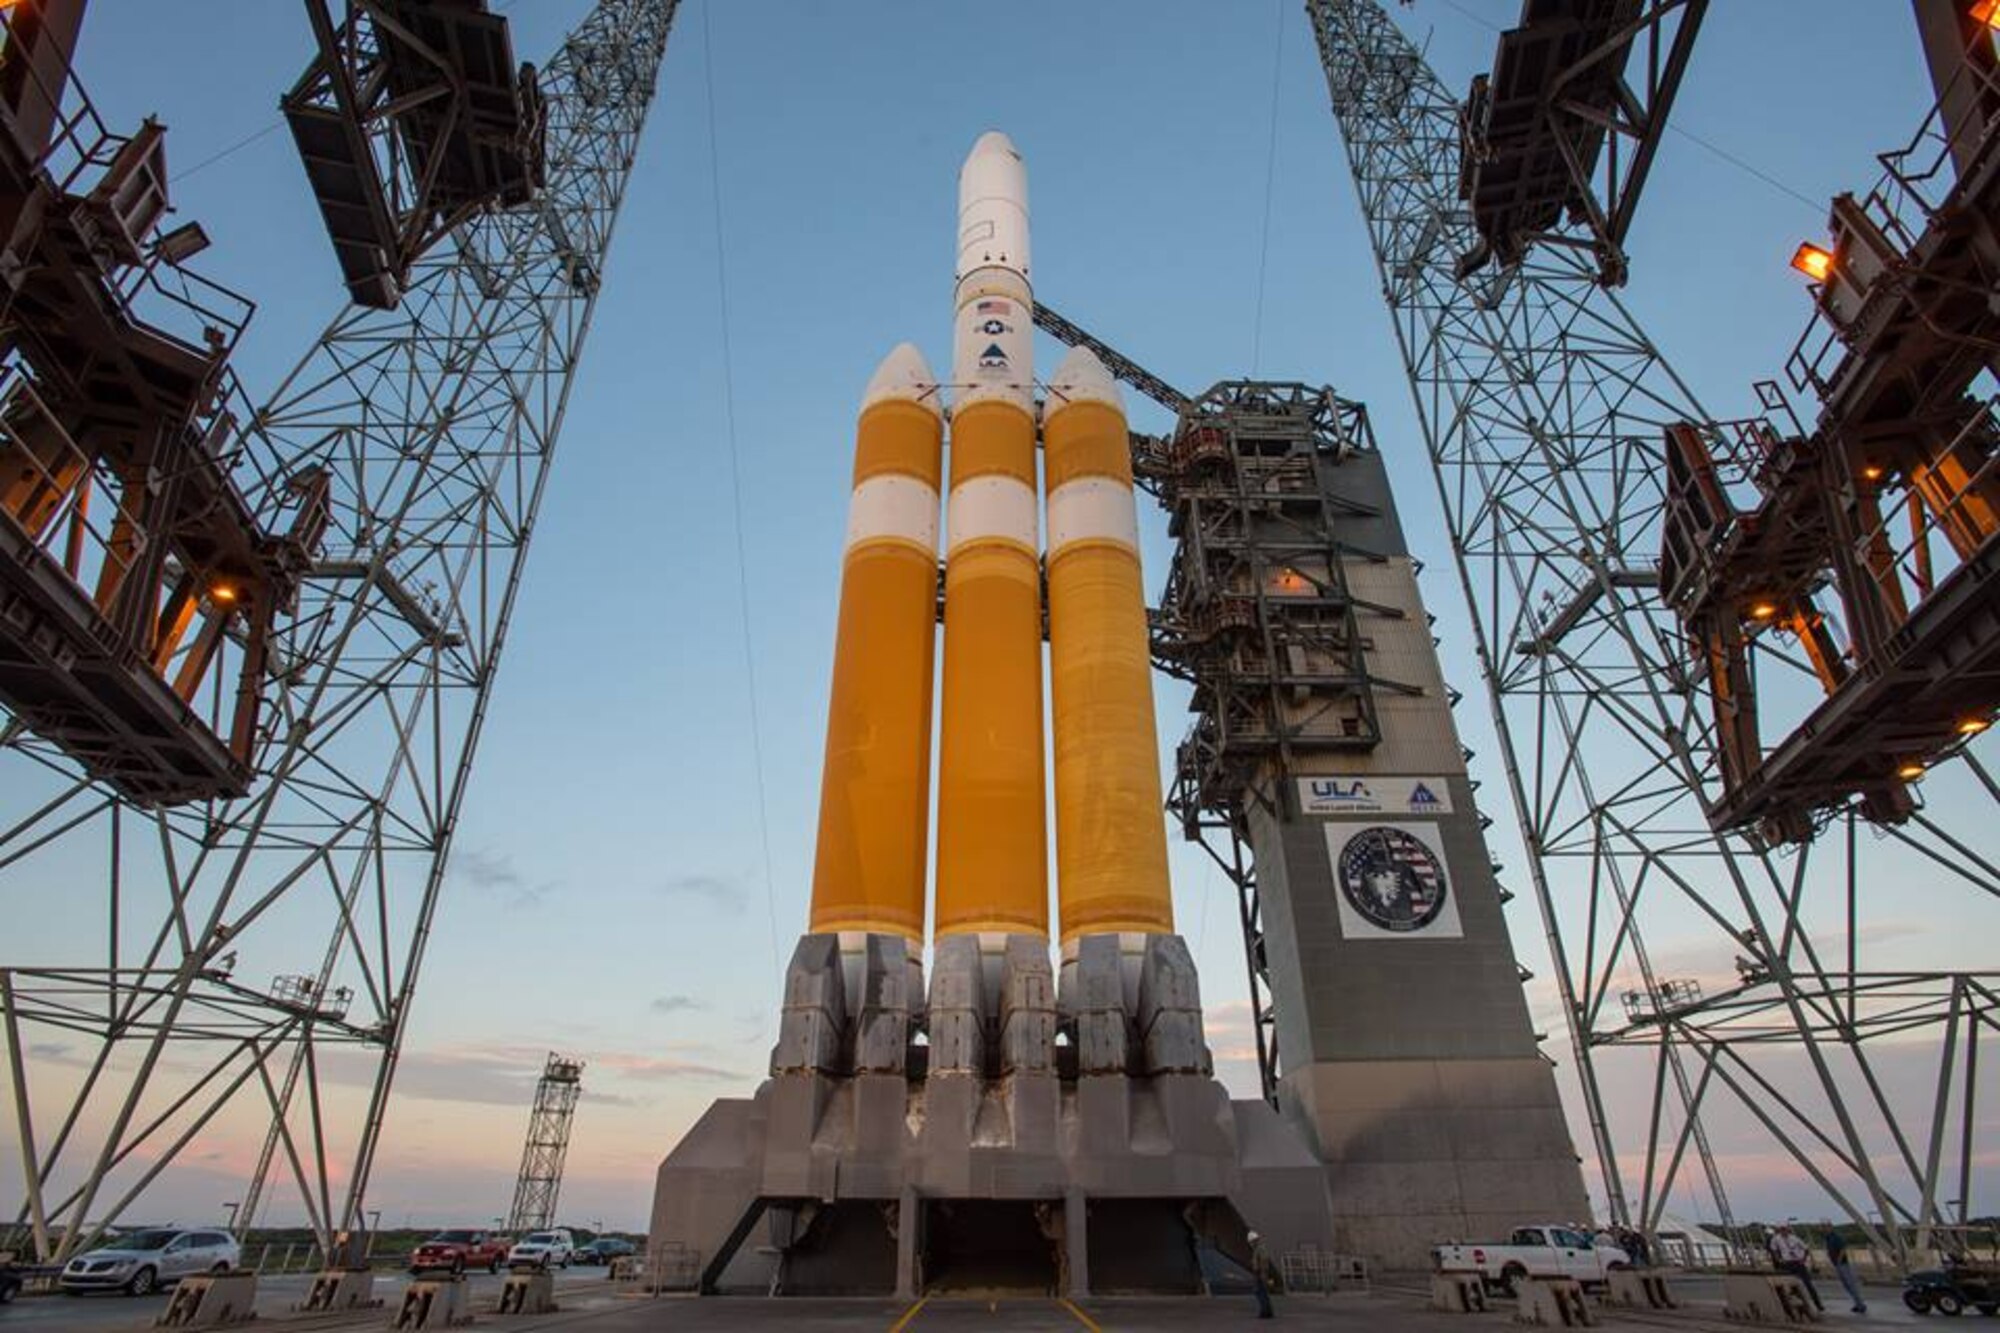 The 45th Space Wing supports United Launch Alliance’s successful launch of the NROL-37 spacecraft aboard a ULA Delta IV-Heavy rocket from Space Launch Complex 37B June 11, 2016, at 1:51 p.m. ET. The ULA Delta IV rocket is carrying a classified national security payload for the U.S. National Reconnaissance Office. (Courtesy photo by ULA)